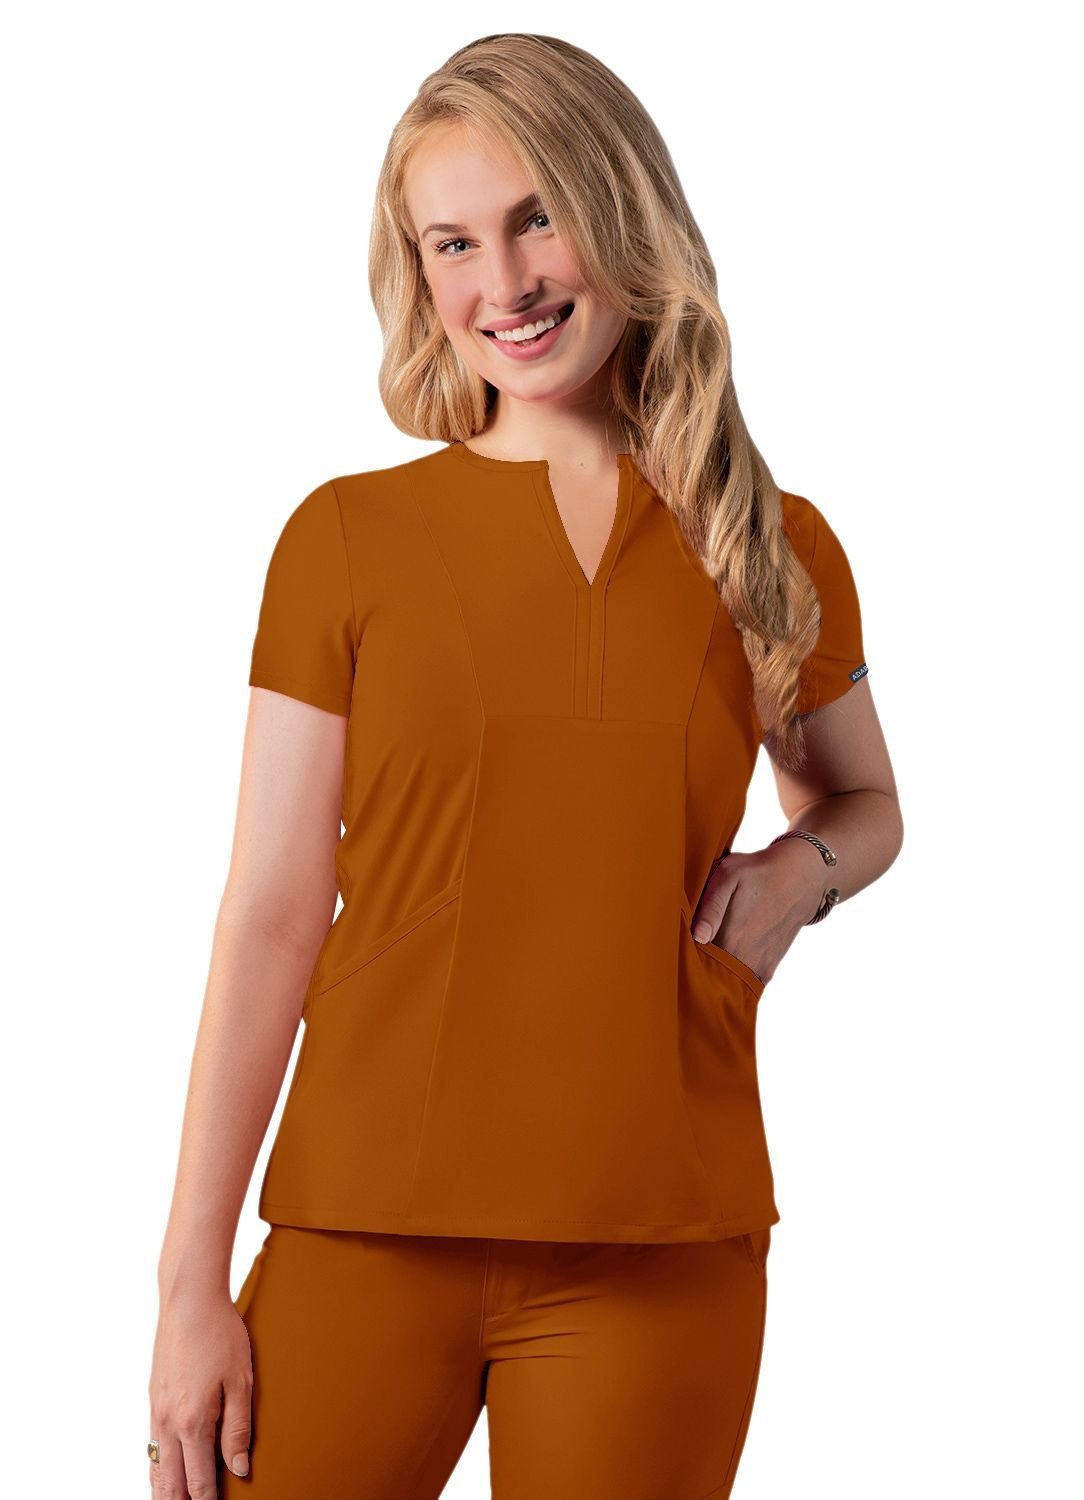 Adar Women's Notched V-Neck Top by Addition Collection